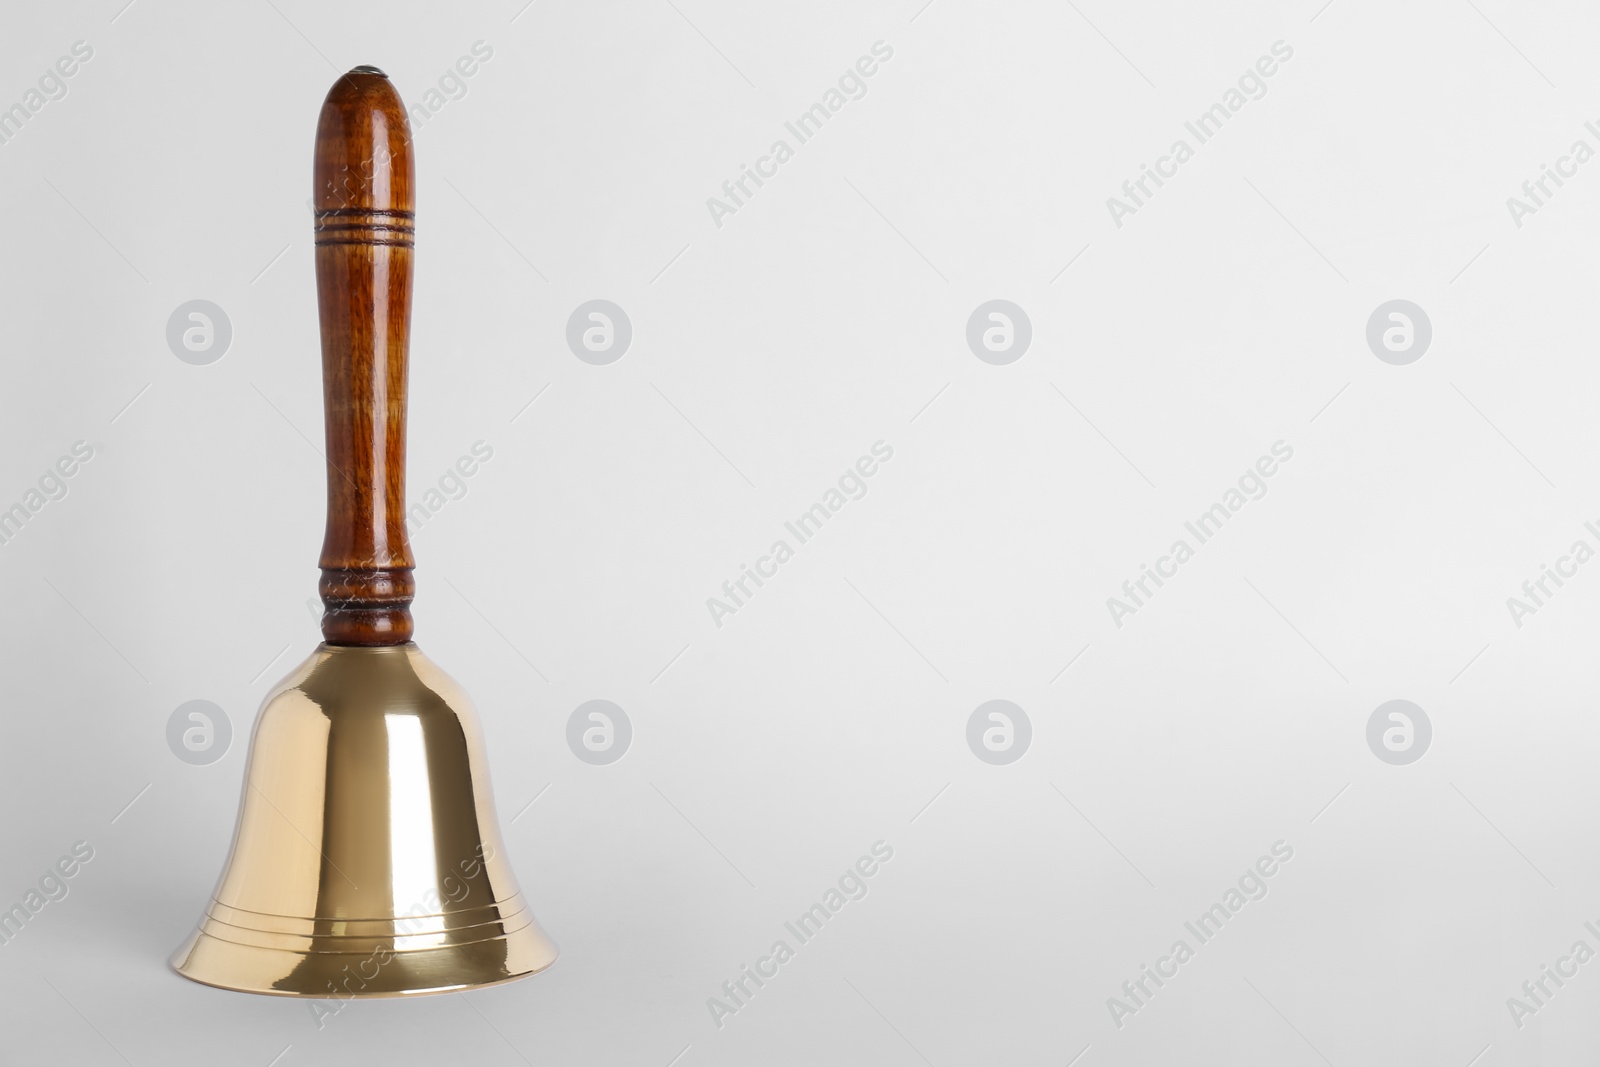 Photo of Golden school bell with wooden handle on grey background. Space for text